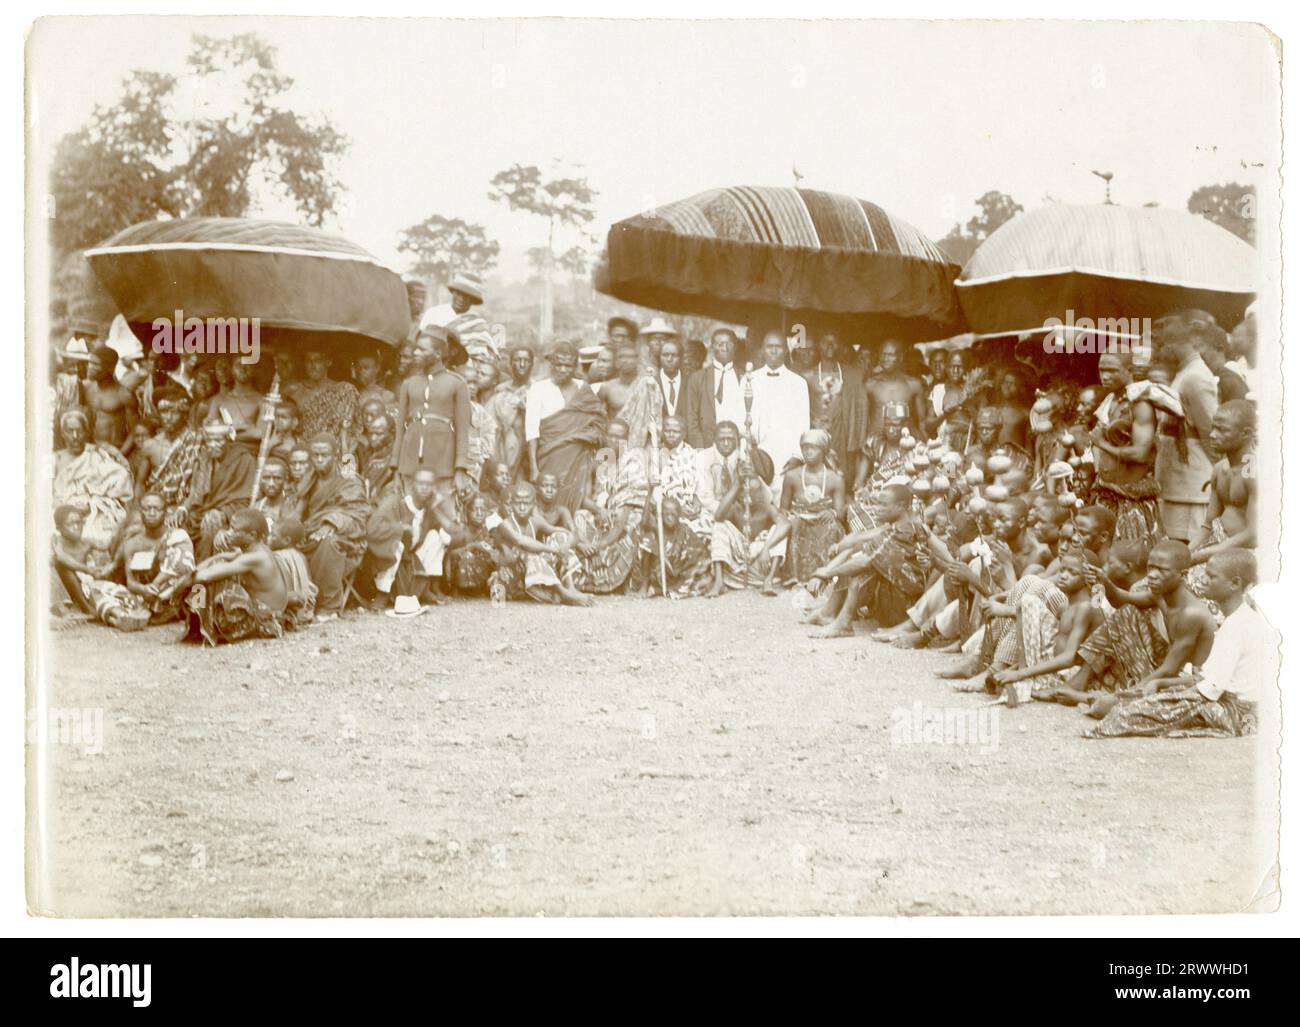 A large crowd of African men gather on an expanse of grass. They are grouped in a semicircle and some are sheltering under three large umbrellas. Some are dressed in traditional robes, others in Western-style office dress and some in police-style uniform. Original manuscript caption: Native chiefs 'Palaver'. Stock Photo